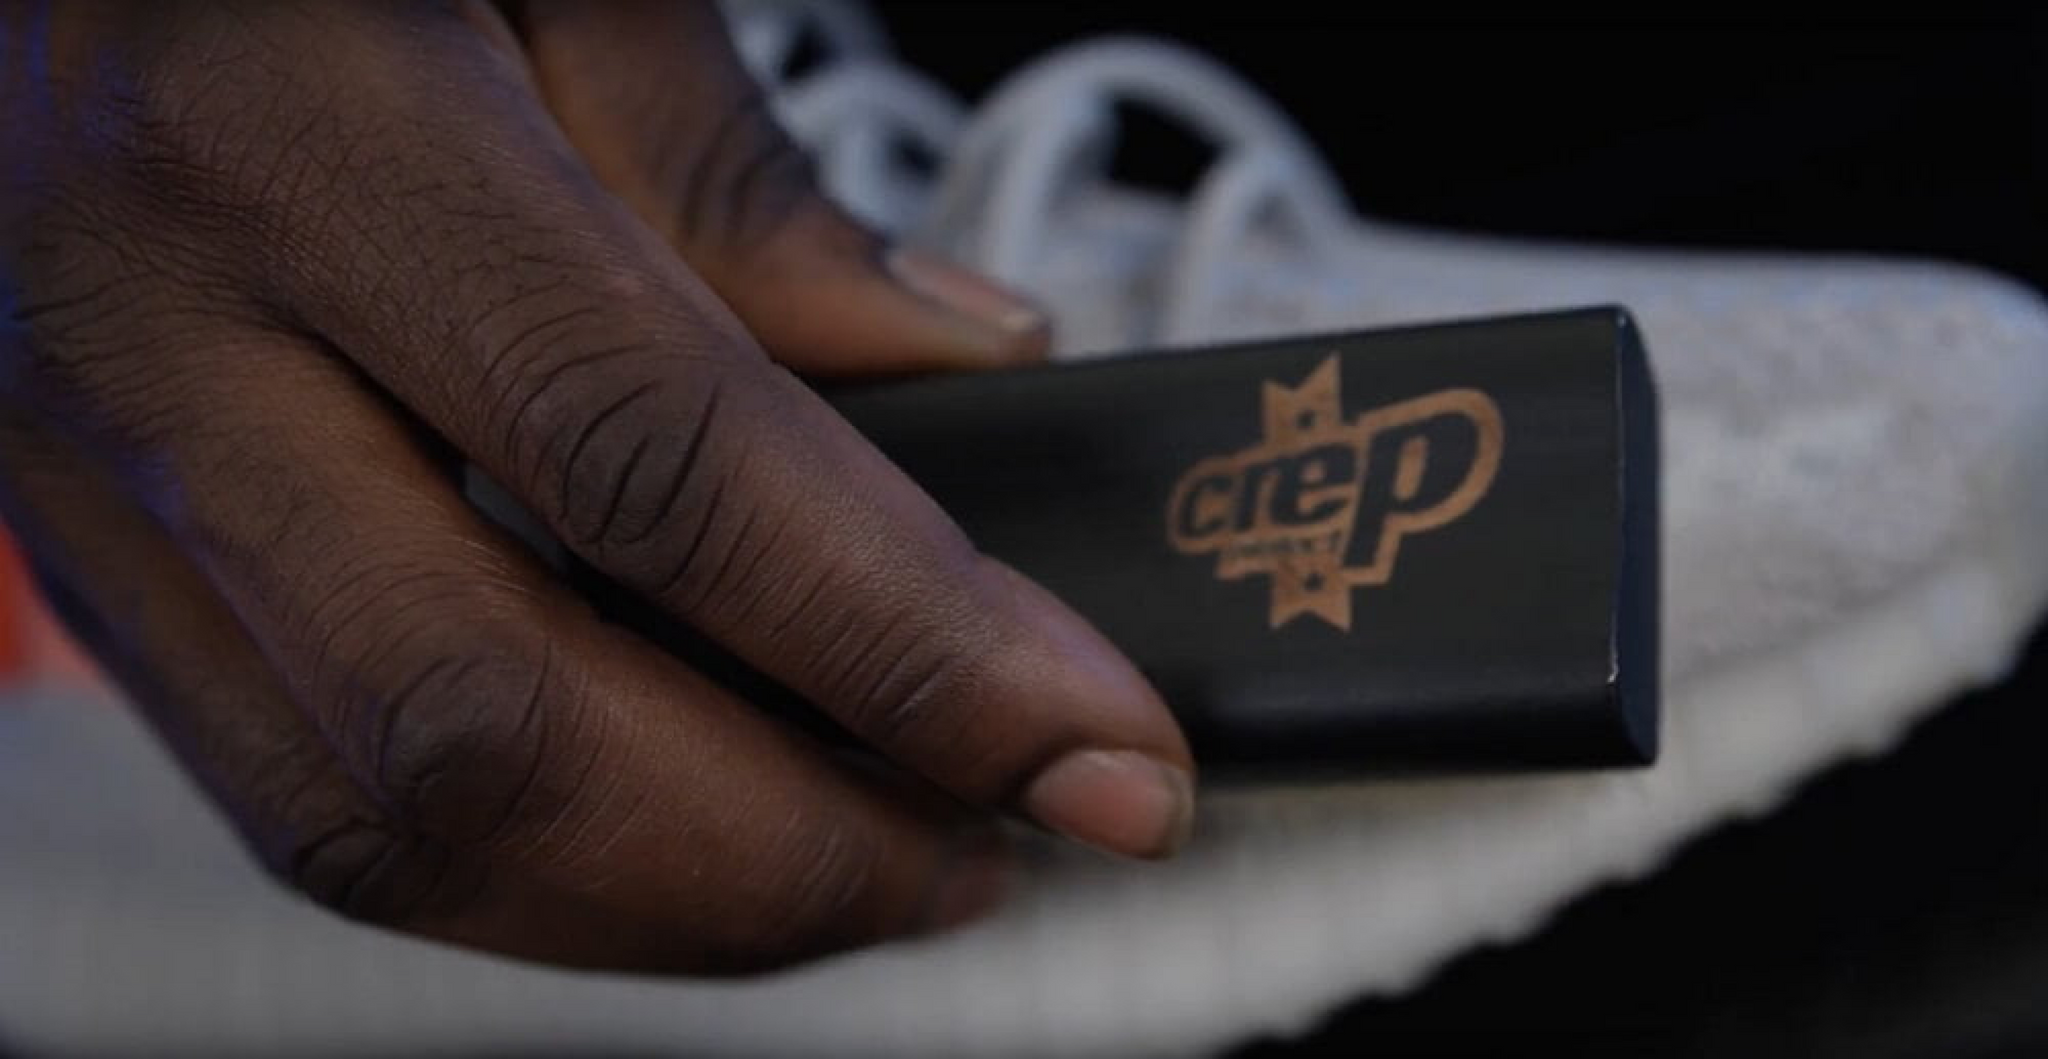 Introducing Crep Protect 360 Sneaker Service